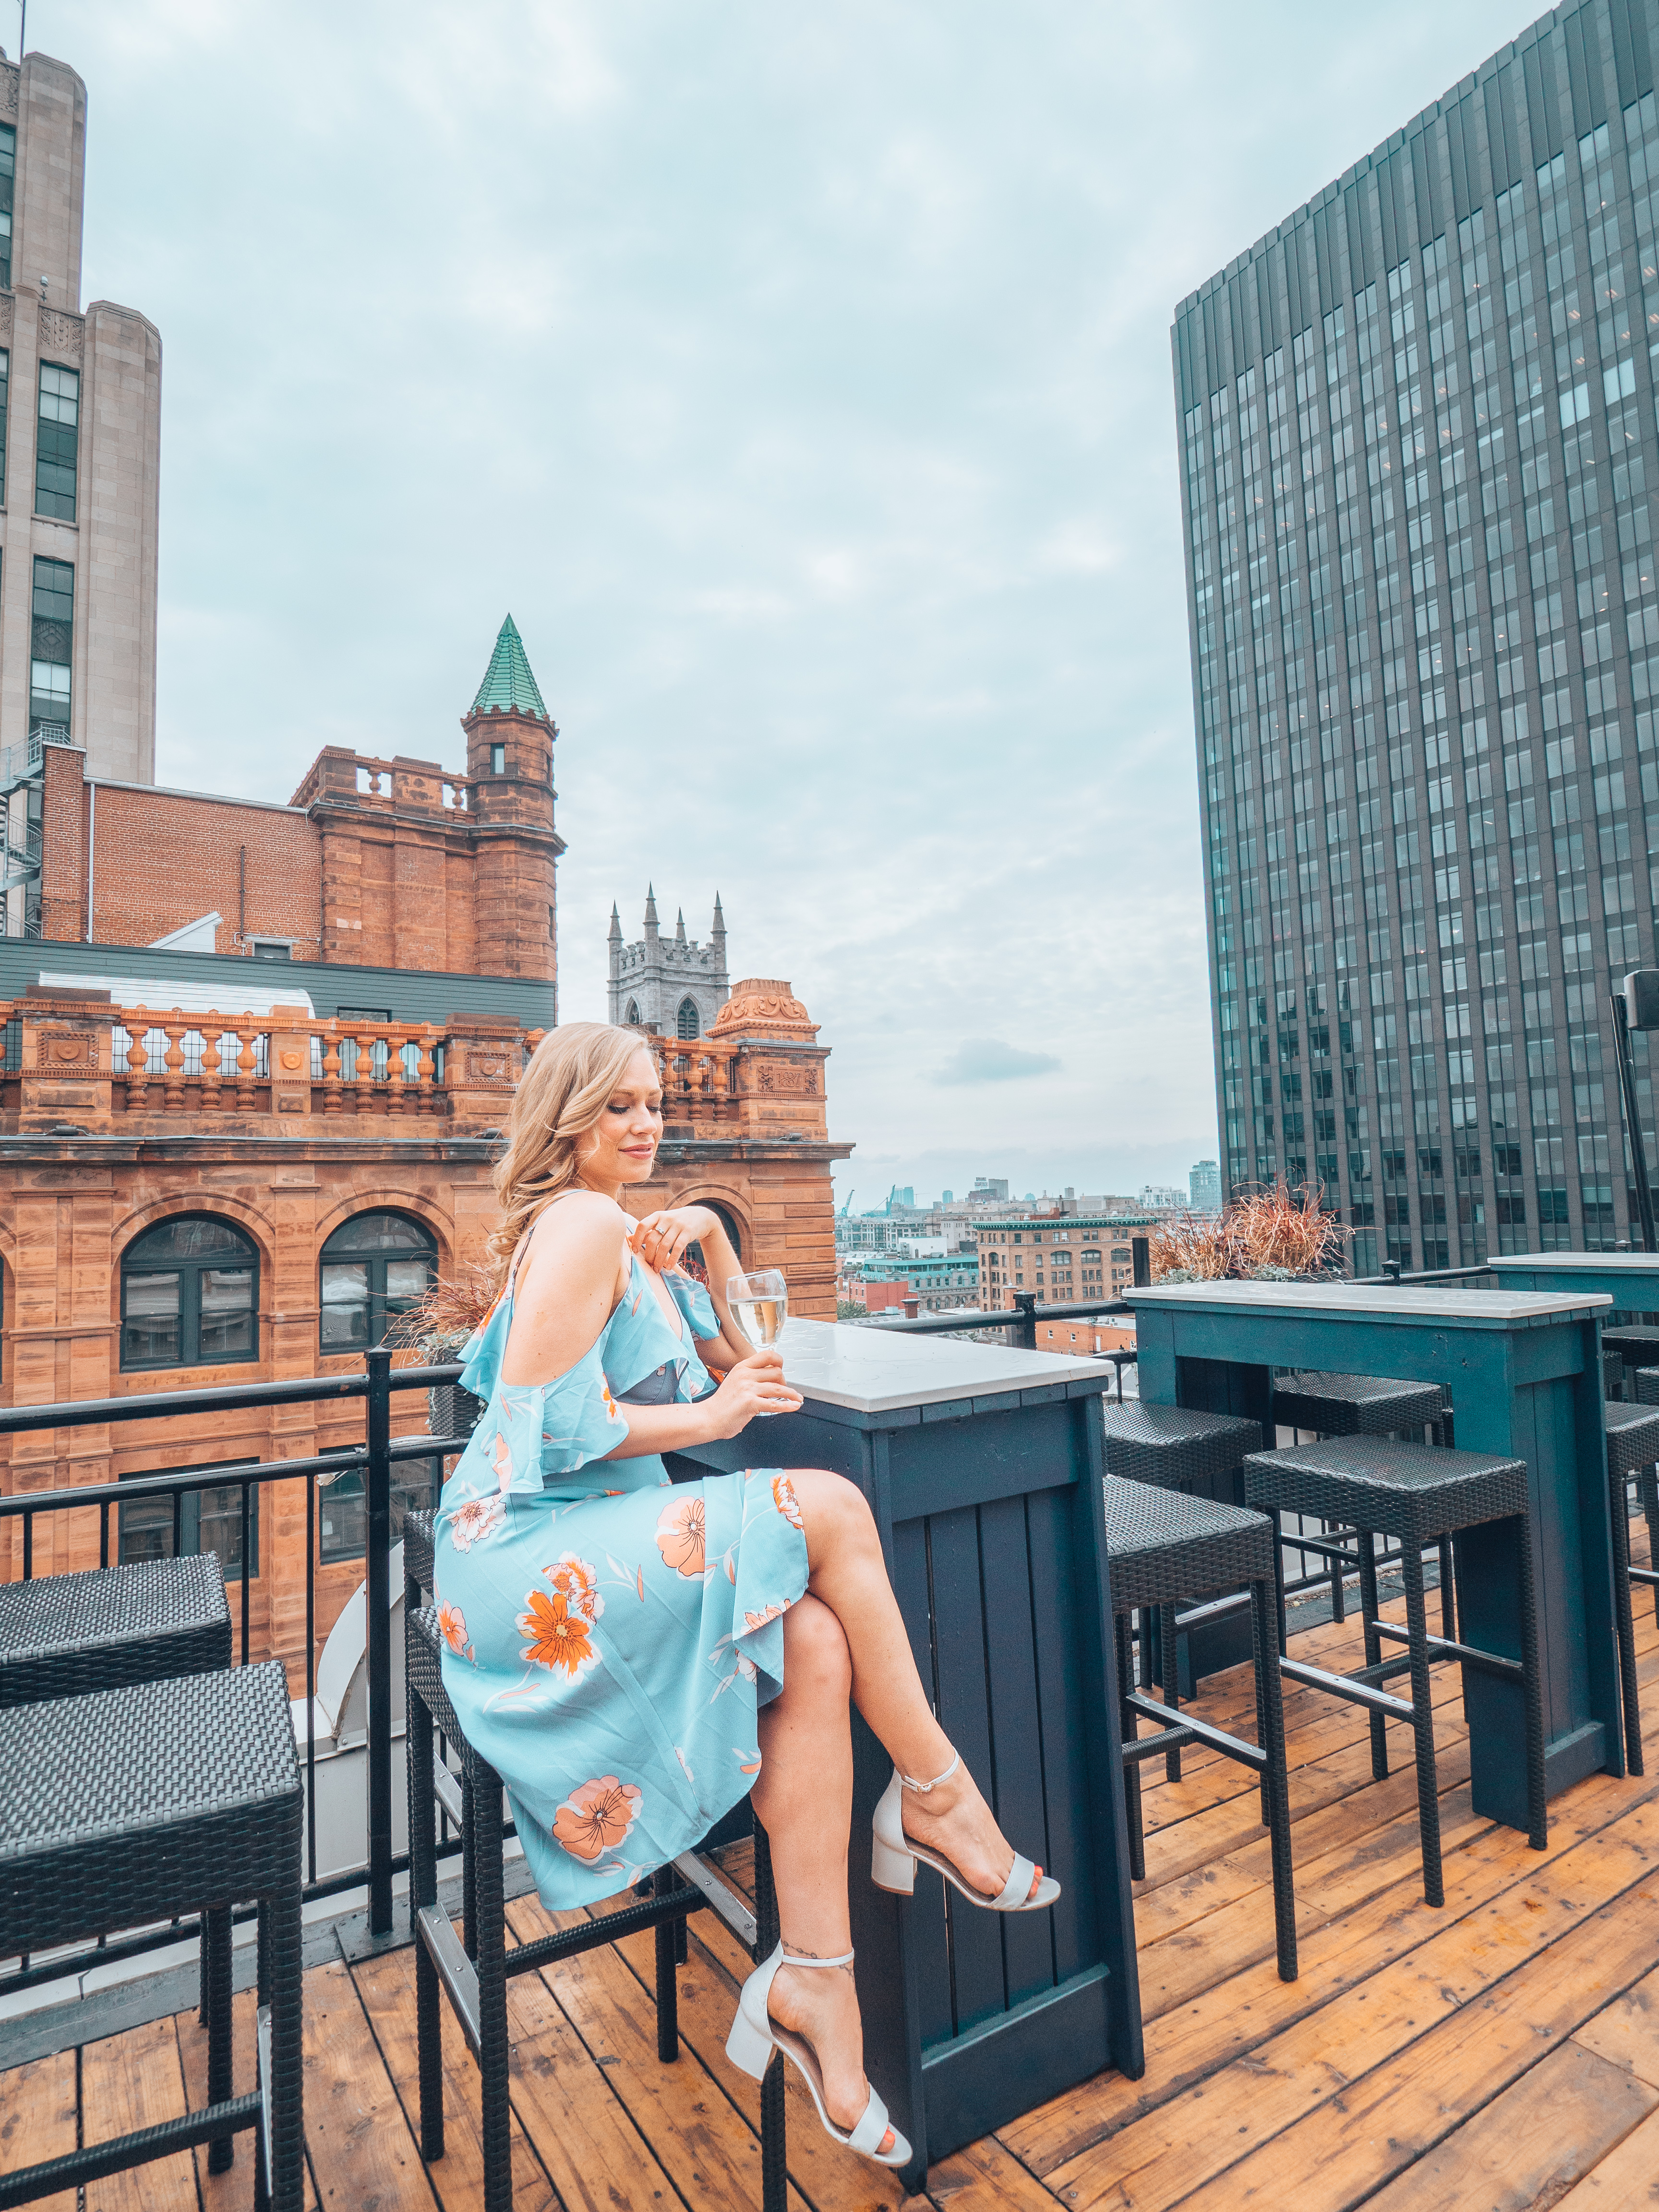 Where to stay in downtown Montreal: the Hotel Place D'Armes. This 5 star luxury hotel in Montreal and the perfect place to stay. 

Pictured here: The rooftop patio and Terrasse

Click the photo for the full review with photos